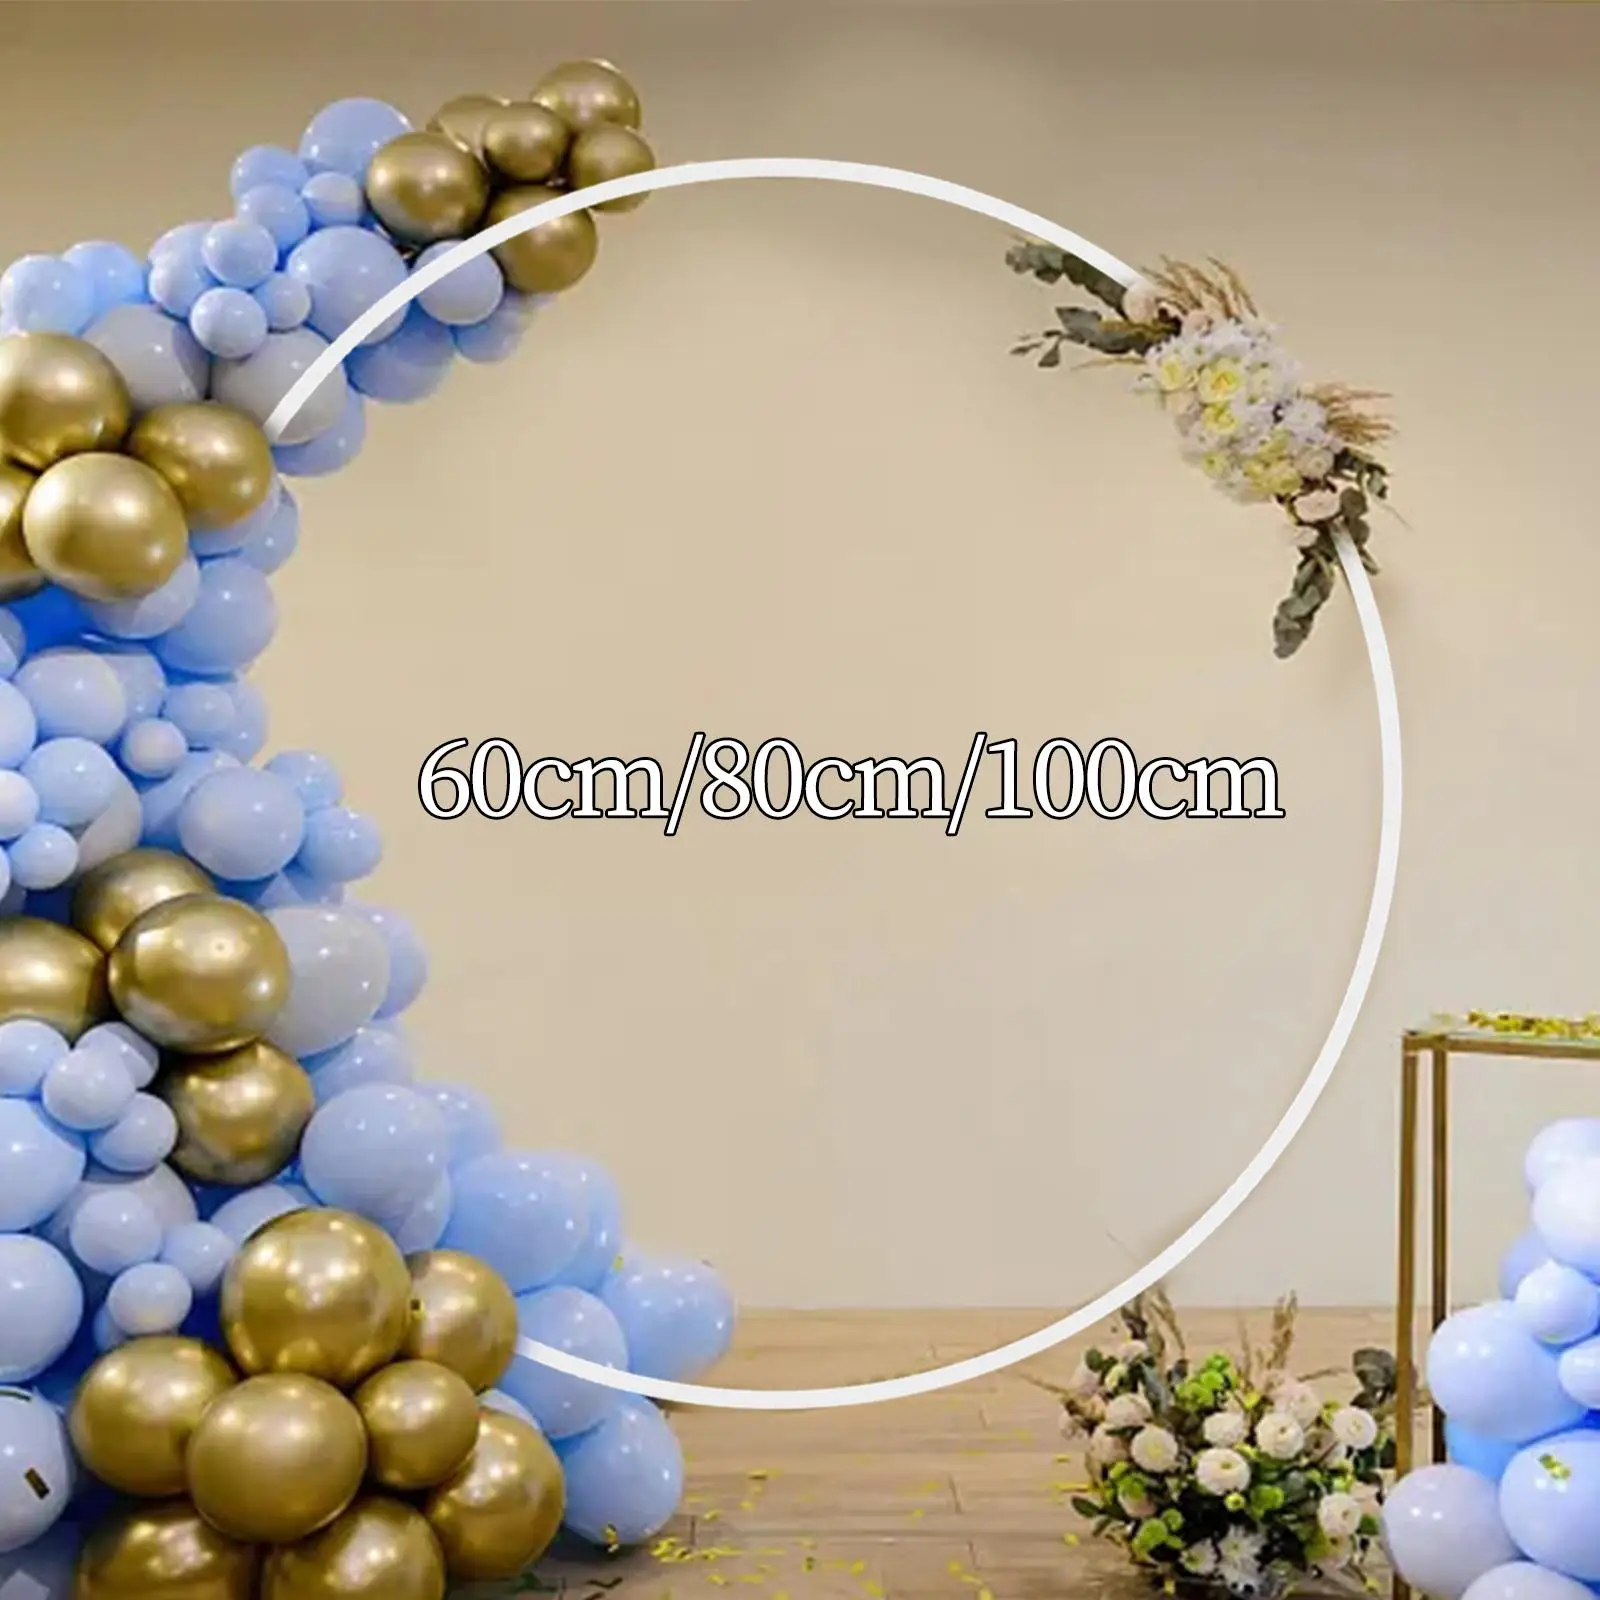 Round Backdrop Stand Balloon Flower Ring Arch Stand Frame for Graduation Halloween Party Baby Shower Wedding